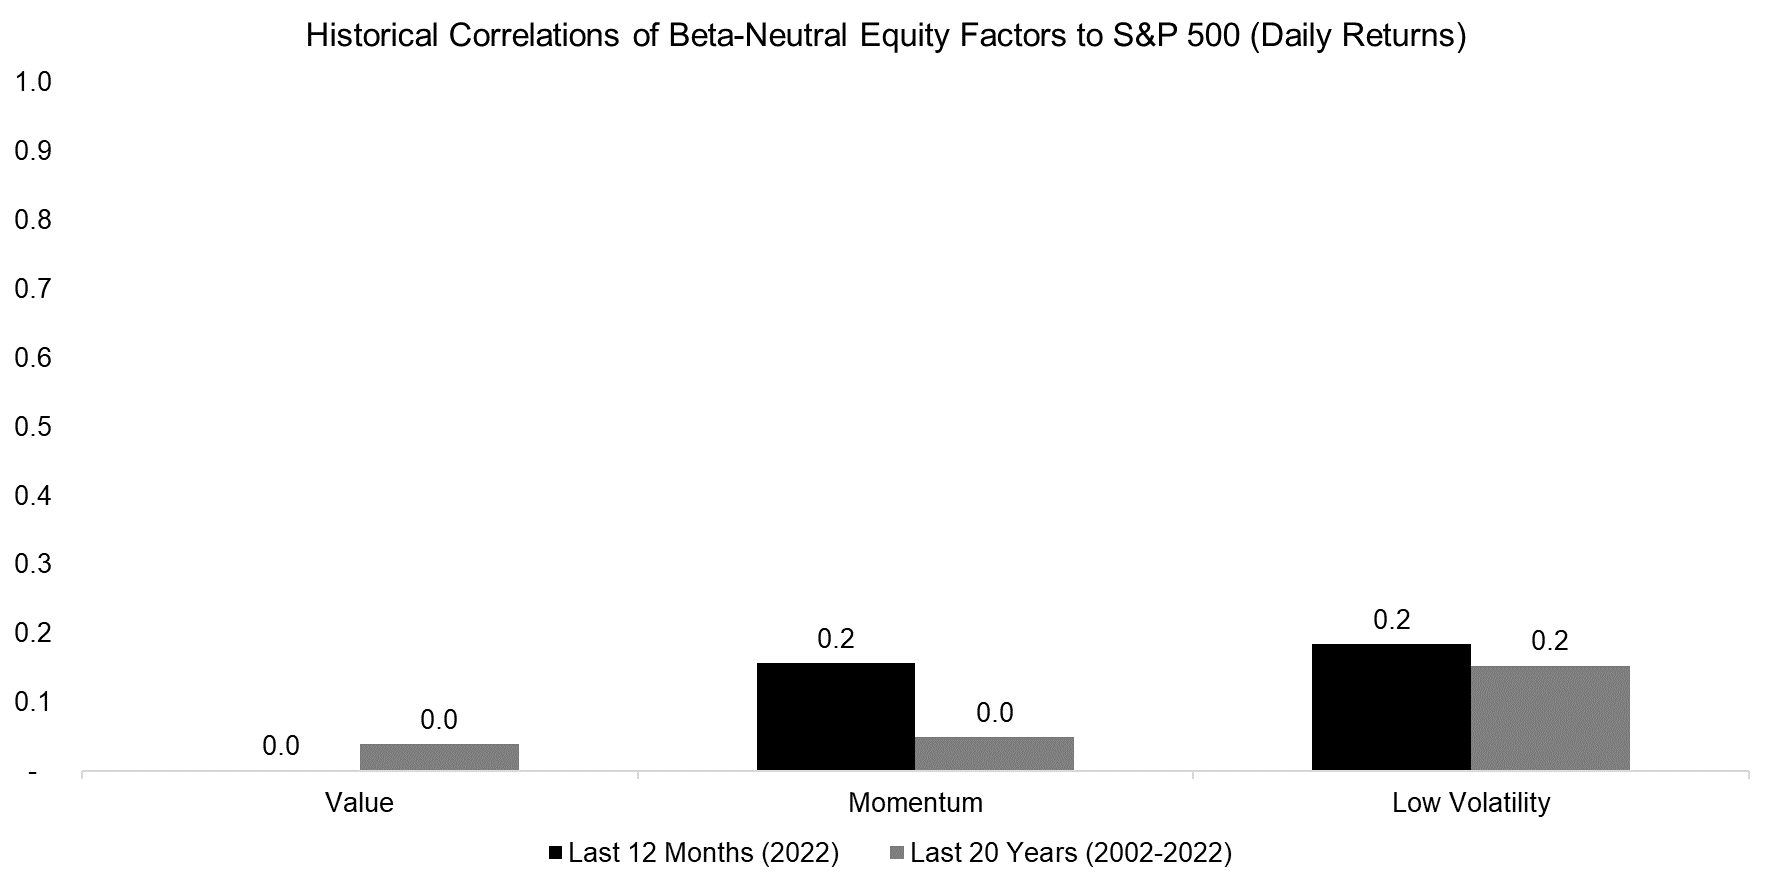 Historical Correlations of Beta-Neutral Equity Factors to S&P 500 (Daily Returns)